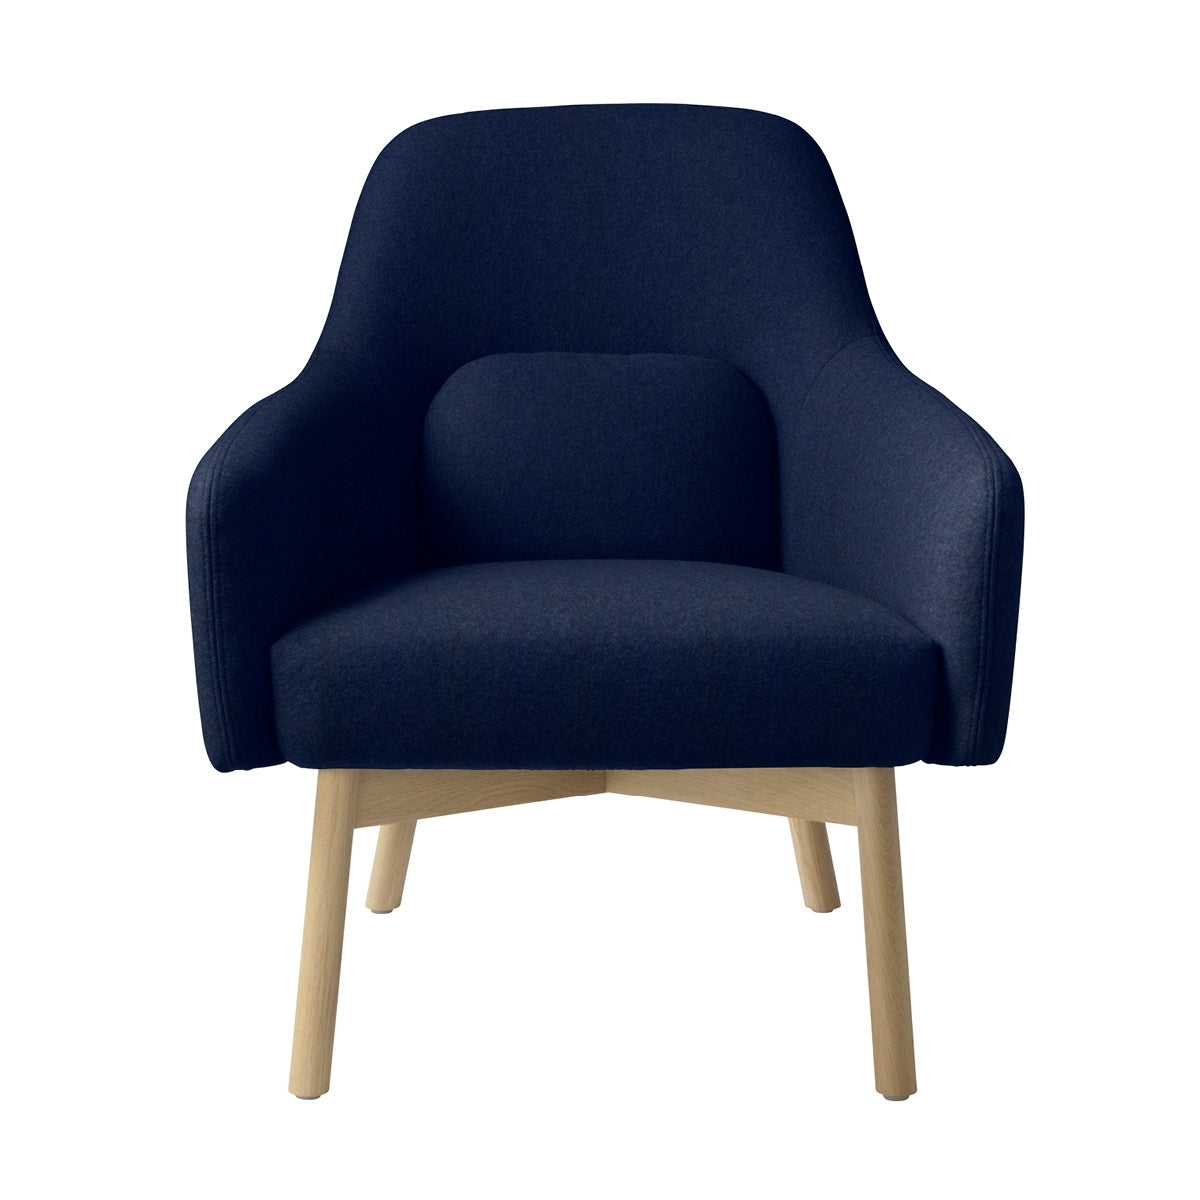 The FDB Mobler Gesja Wing Chair